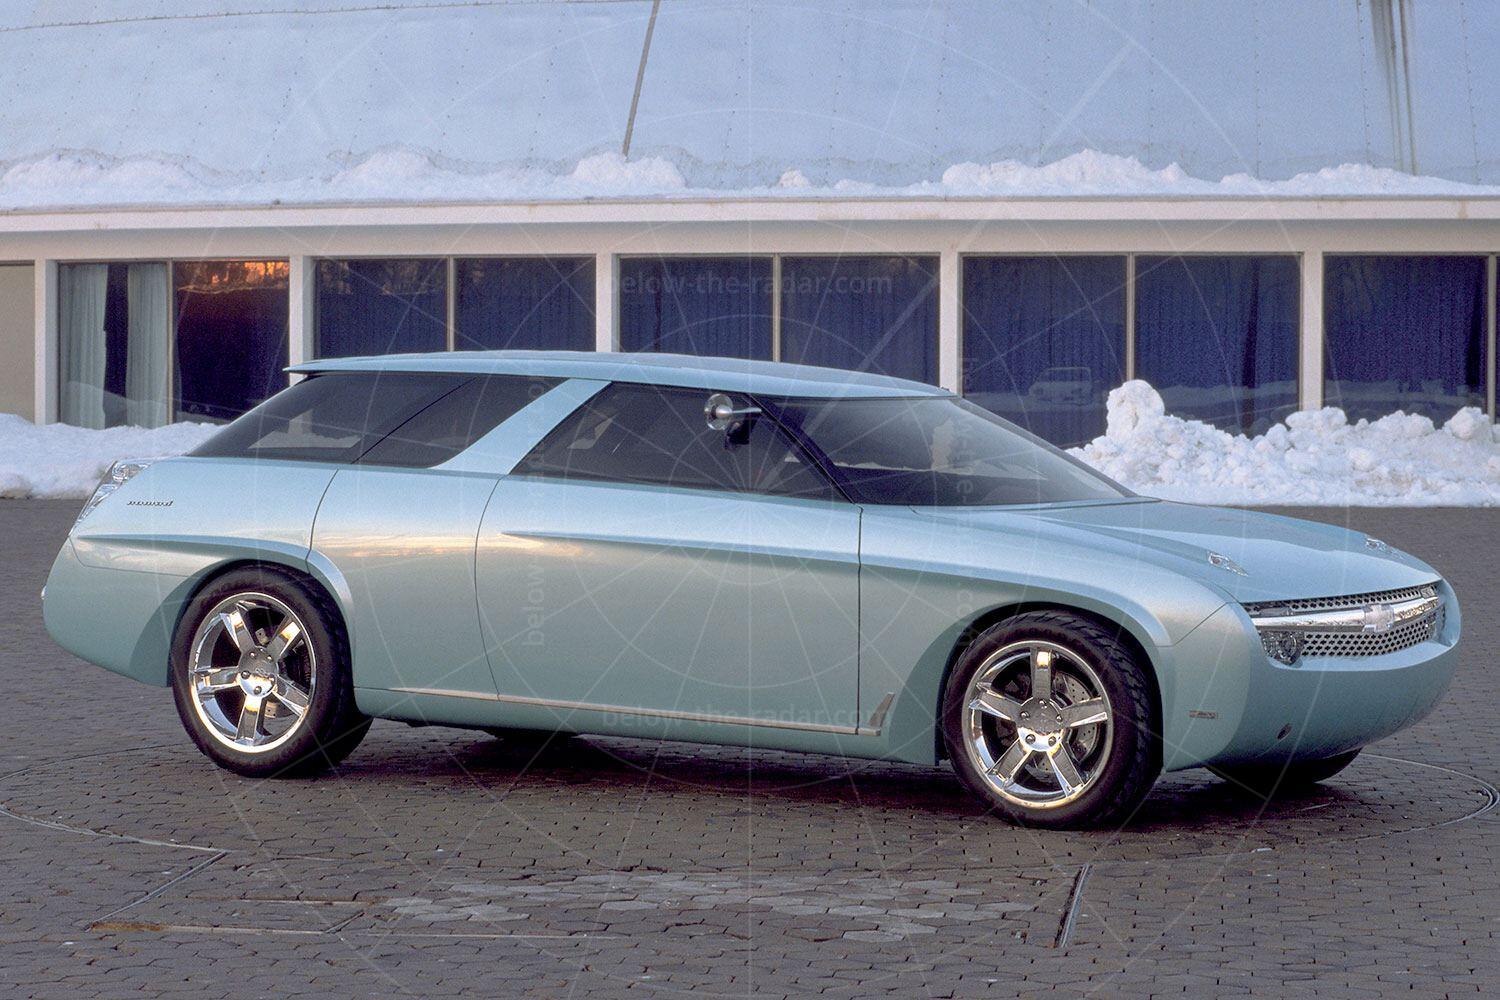 The 1999 Chevrolet Nomad concept Pic: GM | The 1999 Chevrolet Nomad concept